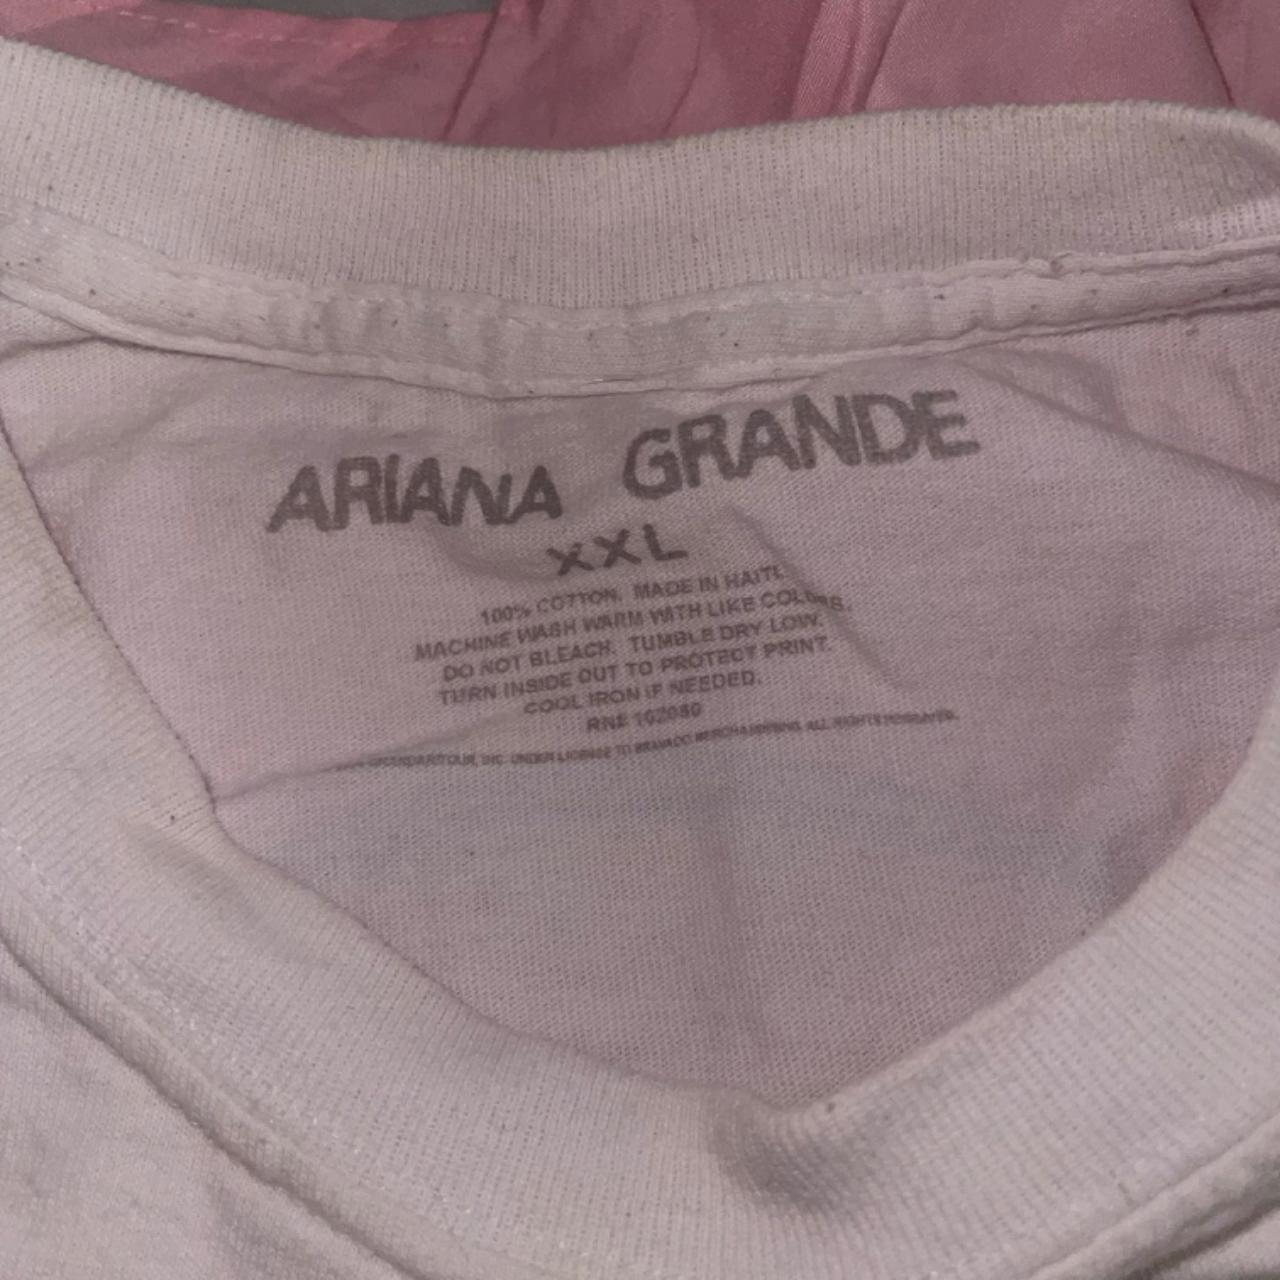 Product Image 3 - Ariana grande positions shirt
-I CANT